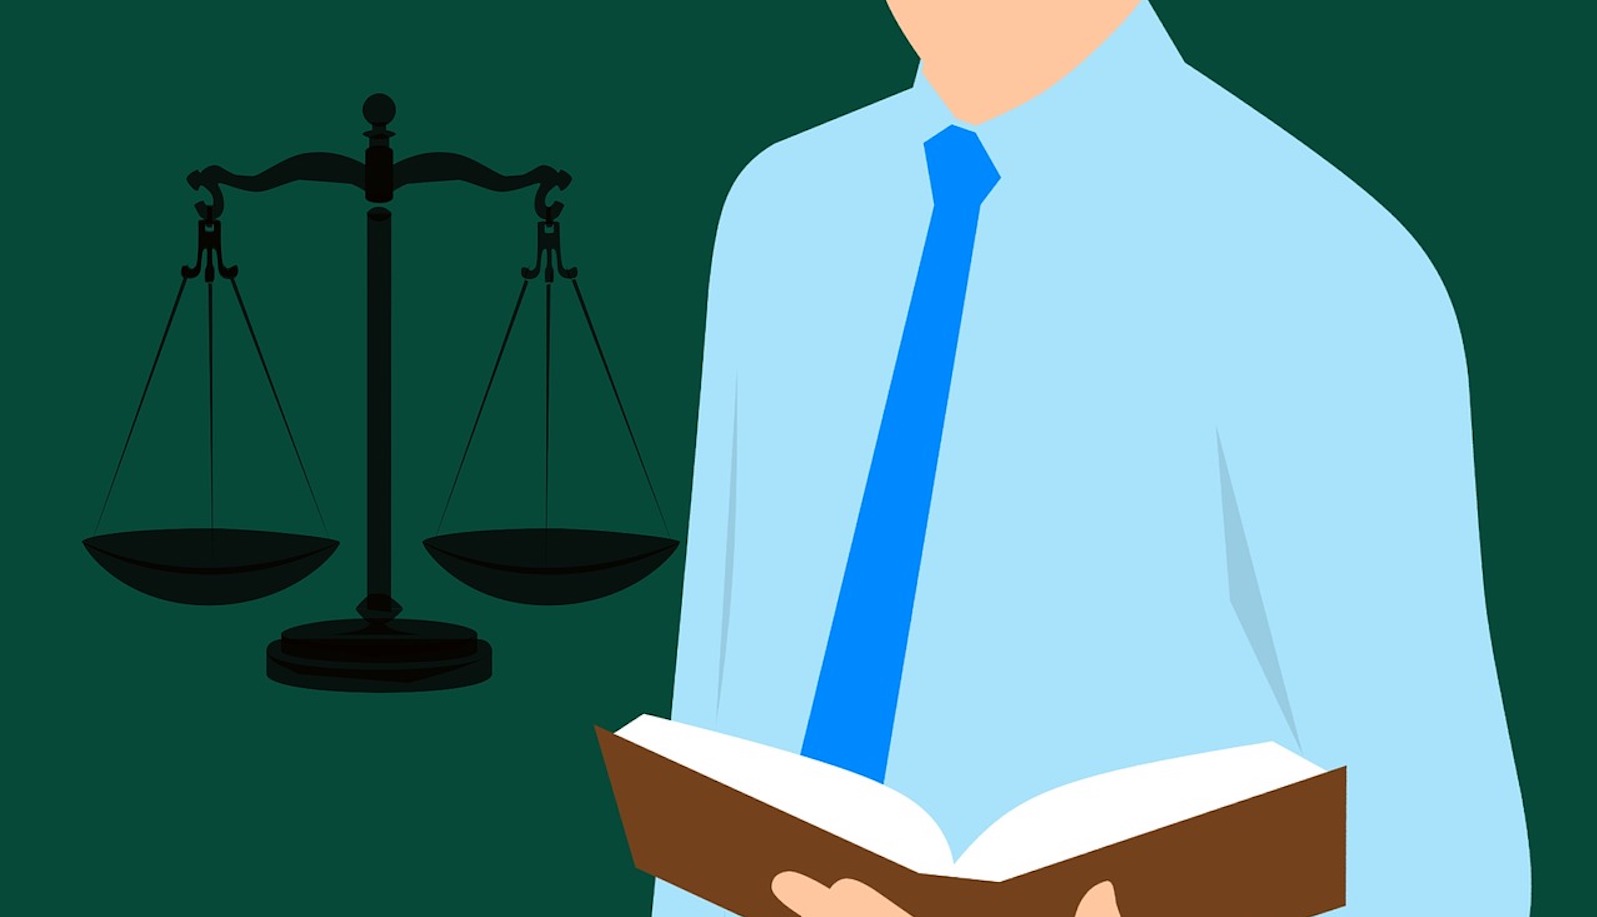 Animated image of a person in a blue shirt and tie holding a law book with a balance scale in the background